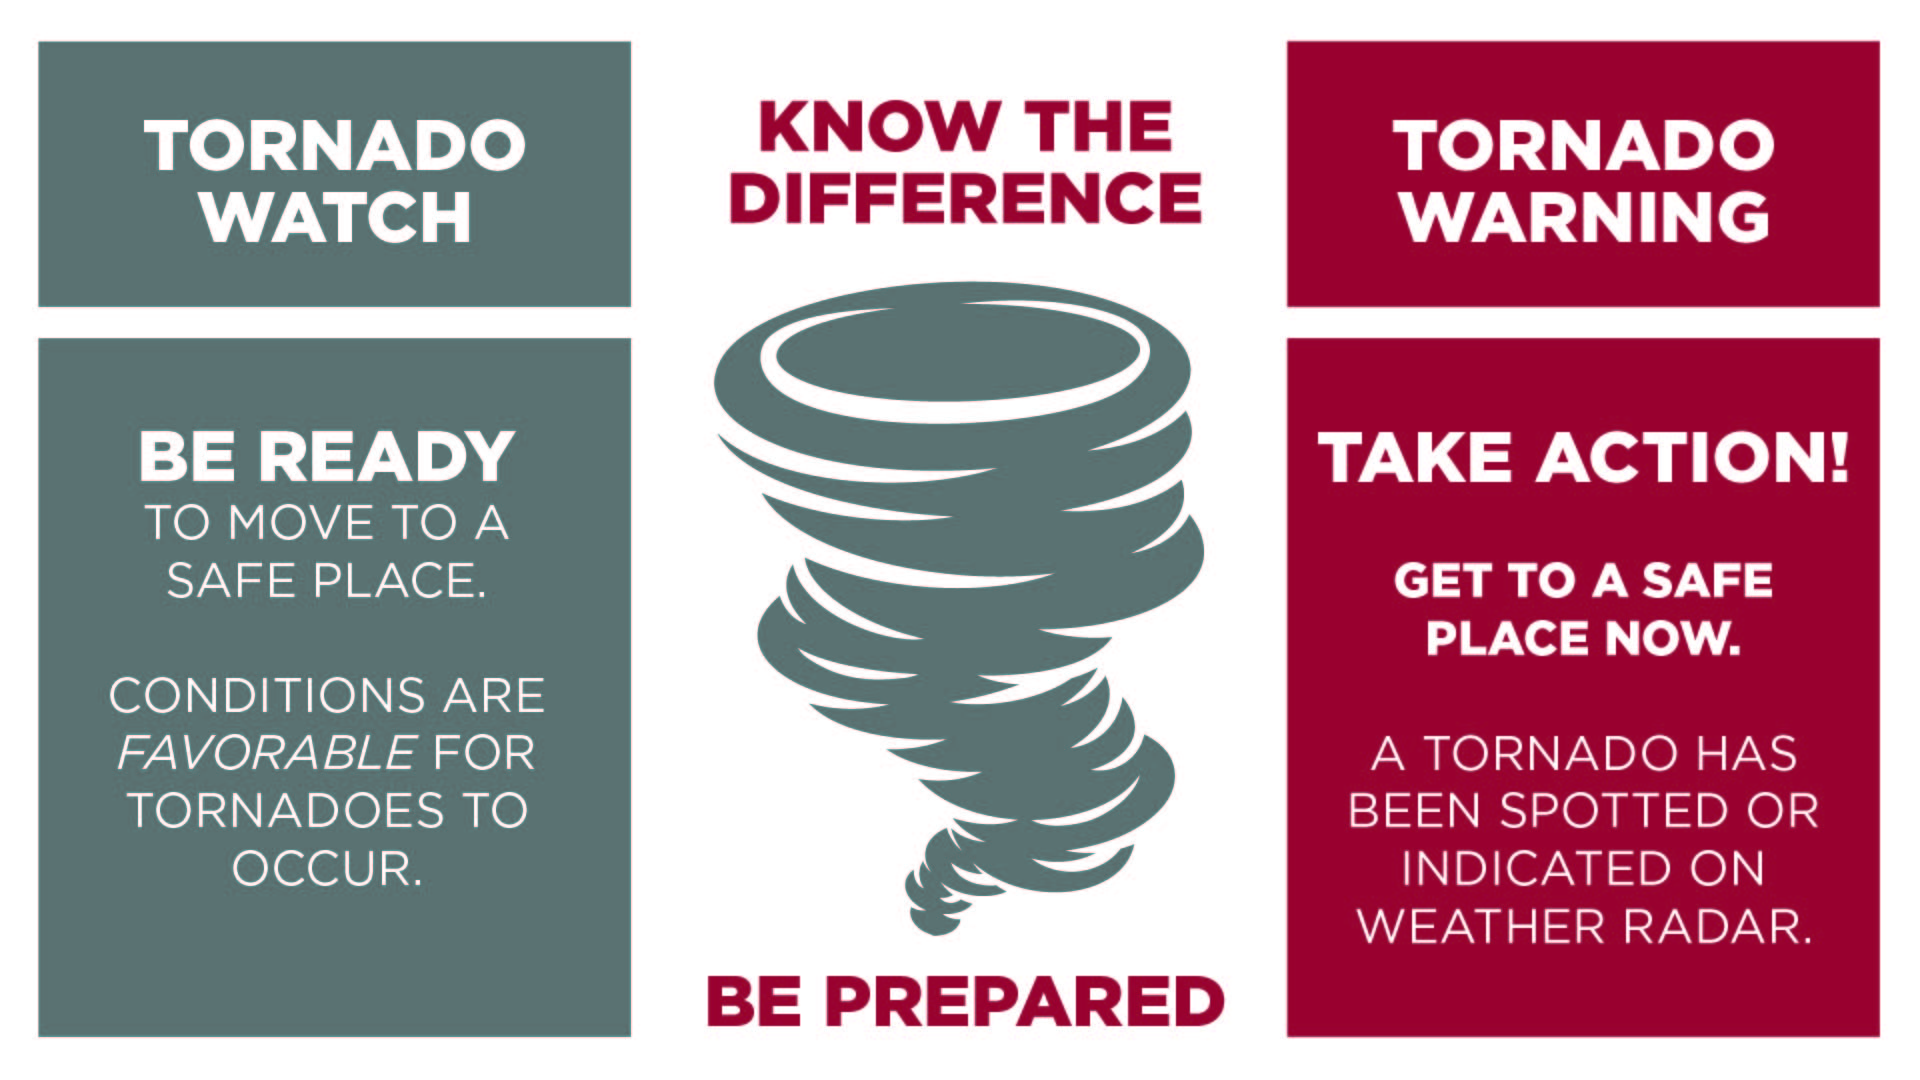 A graphic which shows the difference between a tornado watch and a tornado warning